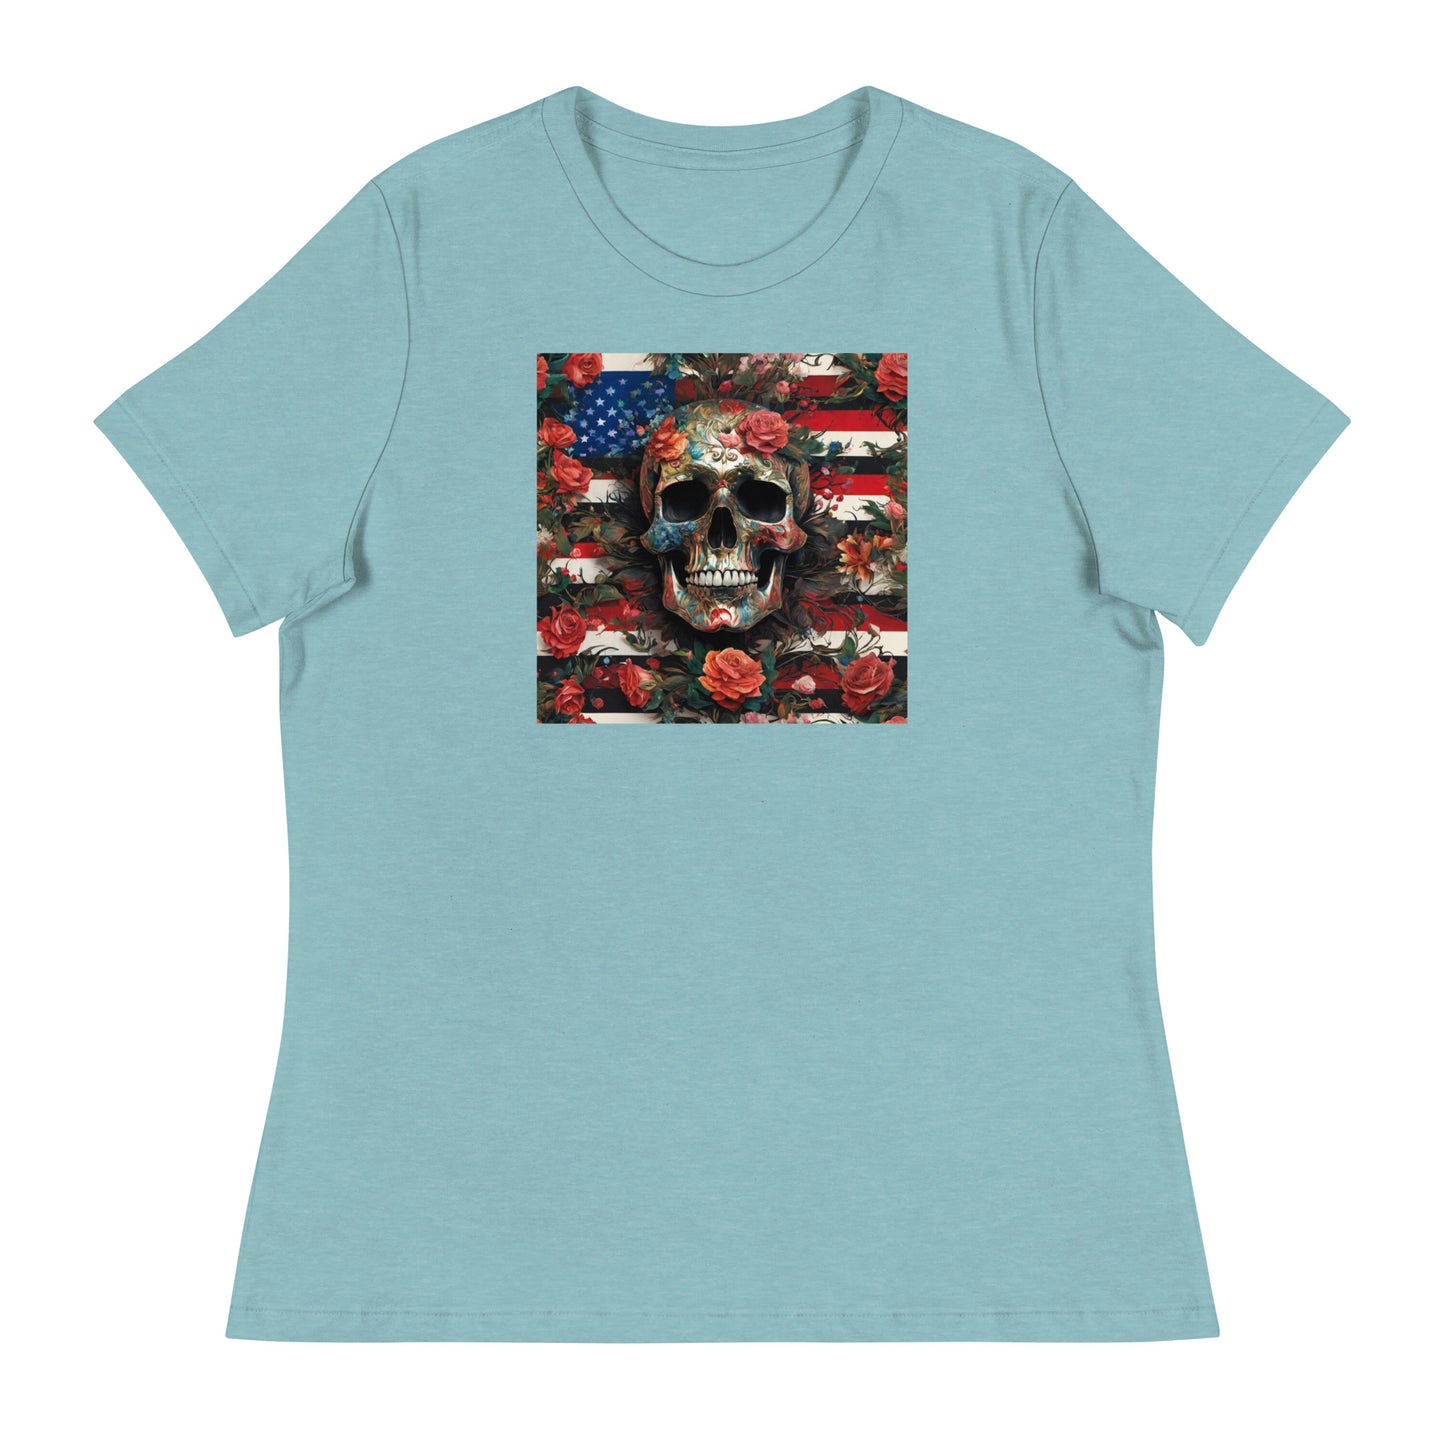 Skull, Roses, and Flag Women's Graphic T-Shirt Heather Blue Lagoon